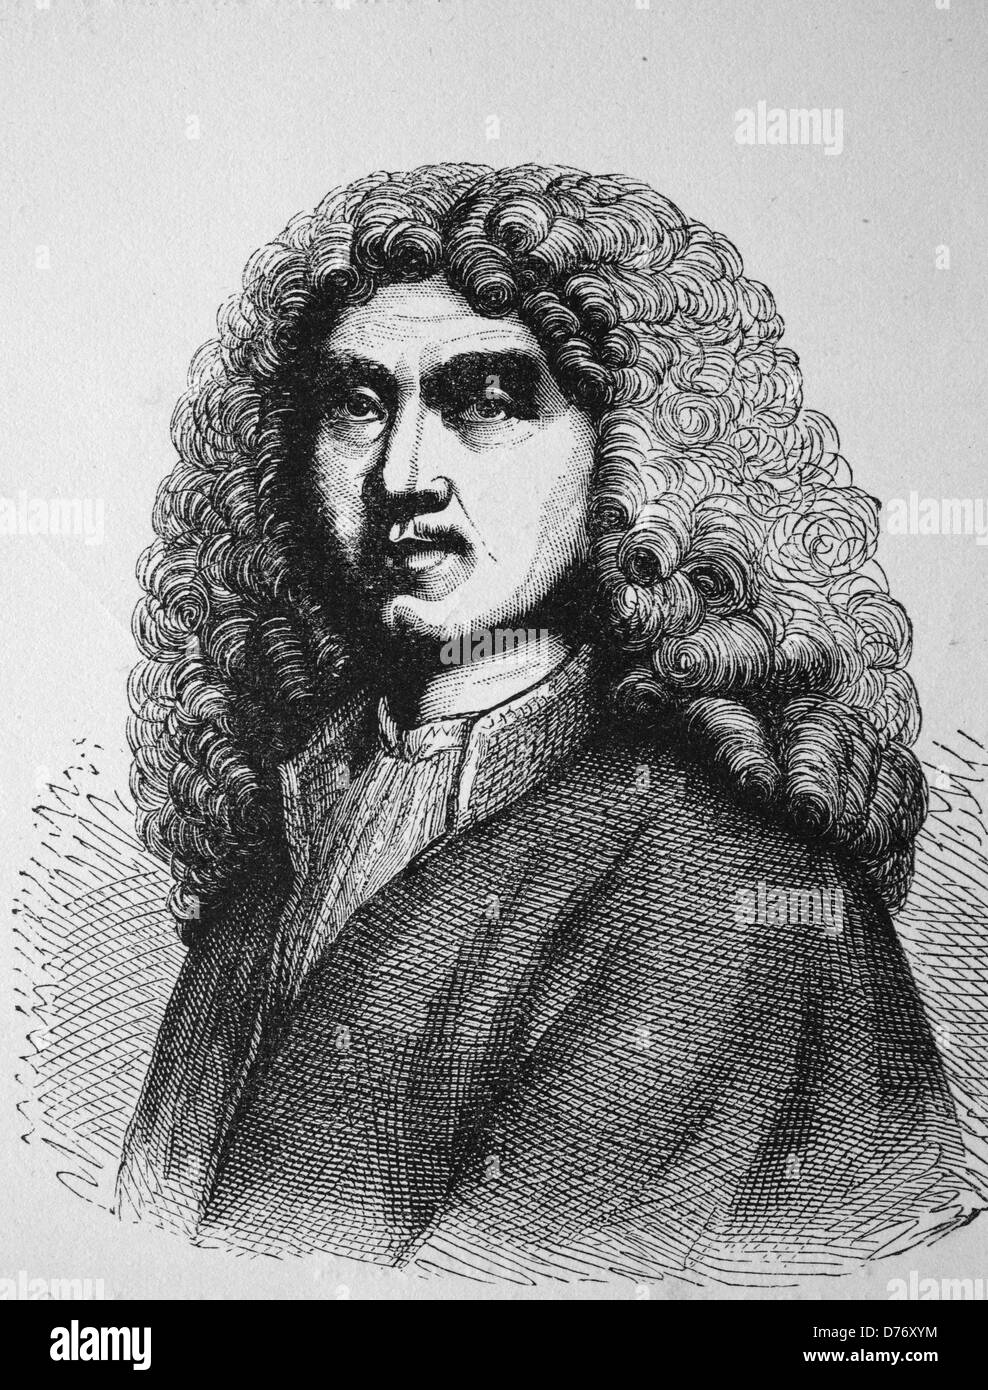 Jean-Baptiste Moliere, 1622 - 1673, French actor and playwright, woodcut from 1880 Stock Photo